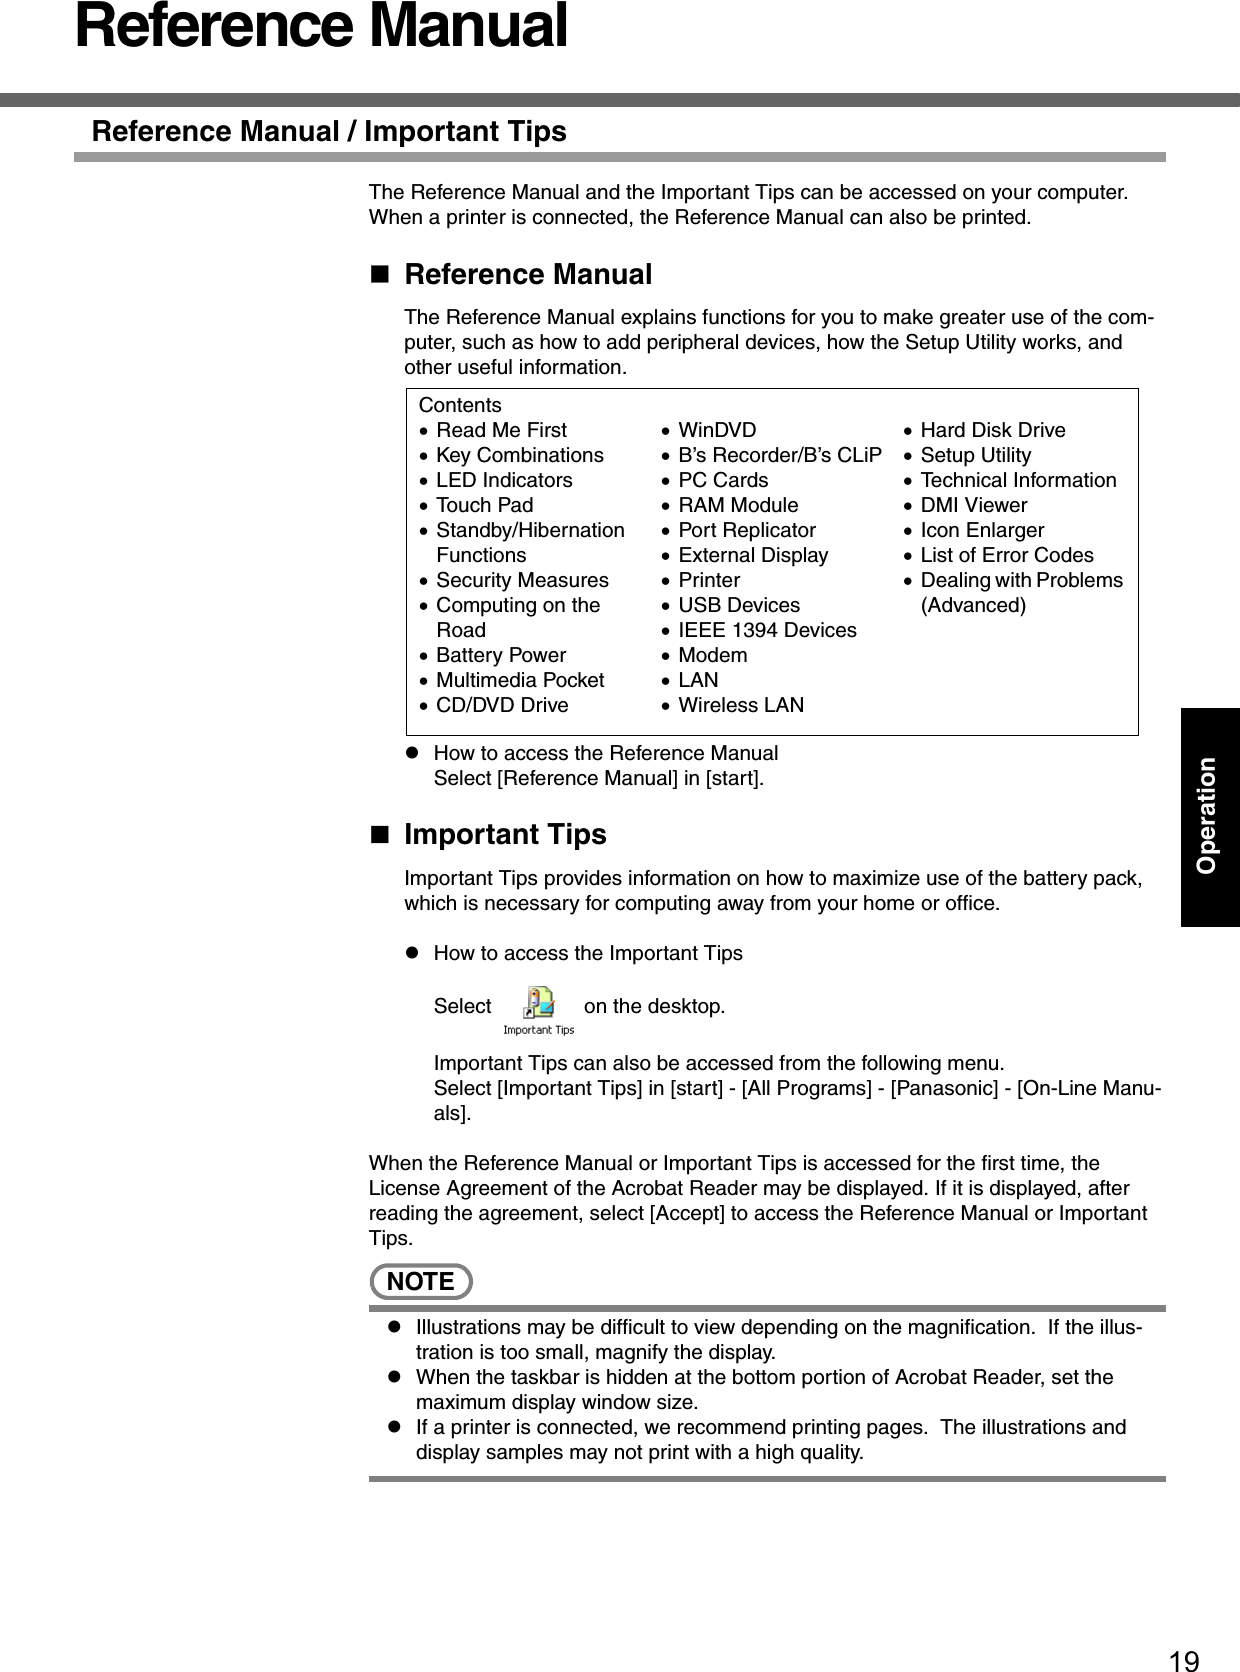 19OperationReference ManualReference Manual / Important TipsThe Reference Manual and the Important Tips can be accessed on your computer.  When a printer is connected, the Reference Manual can also be printed.Reference ManualThe Reference Manual explains functions for you to make greater use of the com-puter, such as how to add peripheral devices, how the Setup Utility works, and other useful information. zHow to access the Reference ManualSelect [Reference Manual] in [start].Important TipsImportant Tips provides information on how to maximize use of the battery pack, which is necessary for computing away from your home or office.zHow to access the Important TipsSelect   on the desktop.Important Tips can also be accessed from the following menu.Select [Important Tips] in [start] - [All Programs] - [Panasonic] - [On-Line Manu-als].When the Reference Manual or Important Tips is accessed for the first time, the License Agreement of the Acrobat Reader may be displayed. If it is displayed, after reading the agreement, select [Accept] to access the Reference Manual or Important Tips.NOTEzIllustrations may be difficult to view depending on the magnification.  If the illus-tration is too small, magnify the display.zWhen the taskbar is hidden at the bottom portion of Acrobat Reader, set the maximum display window size.zIf a printer is connected, we recommend printing pages.  The illustrations and display samples may not print with a high quality.Contents•Read Me First •Key Combinations•LED Indicators•Touch Pad•Standby/Hibernation Functions•Security Measures•Computing on the Road•Battery Power•Multimedia Pocket•CD/DVD Drive•WinDVD•B’s Recorder/B’s CLiP•PC Cards•RAM Module•Port Replicator•External Display•Printer•USB Devices•IEEE 1394 Devices•Modem•LAN•Wireless LAN•Hard Disk Drive•Setup Utility•Technical Information•DMI Viewer•Icon Enlarger•List of Error Codes•Dealing with Problems (Advanced)